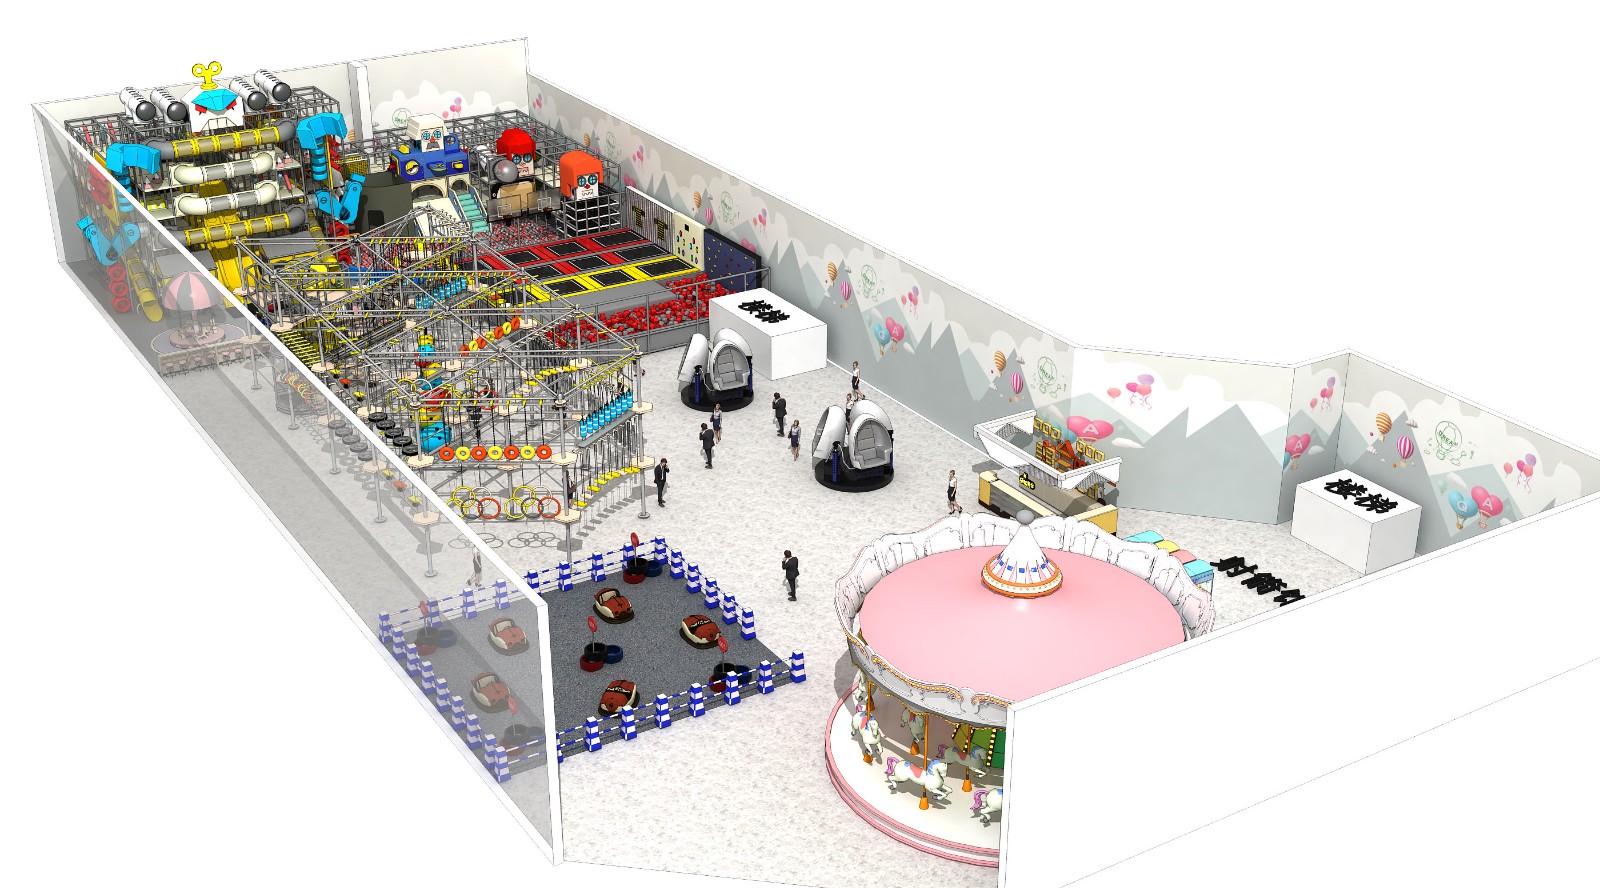 Why to Say that Dream Garden is a Reliable Indoor Playground Supplier?